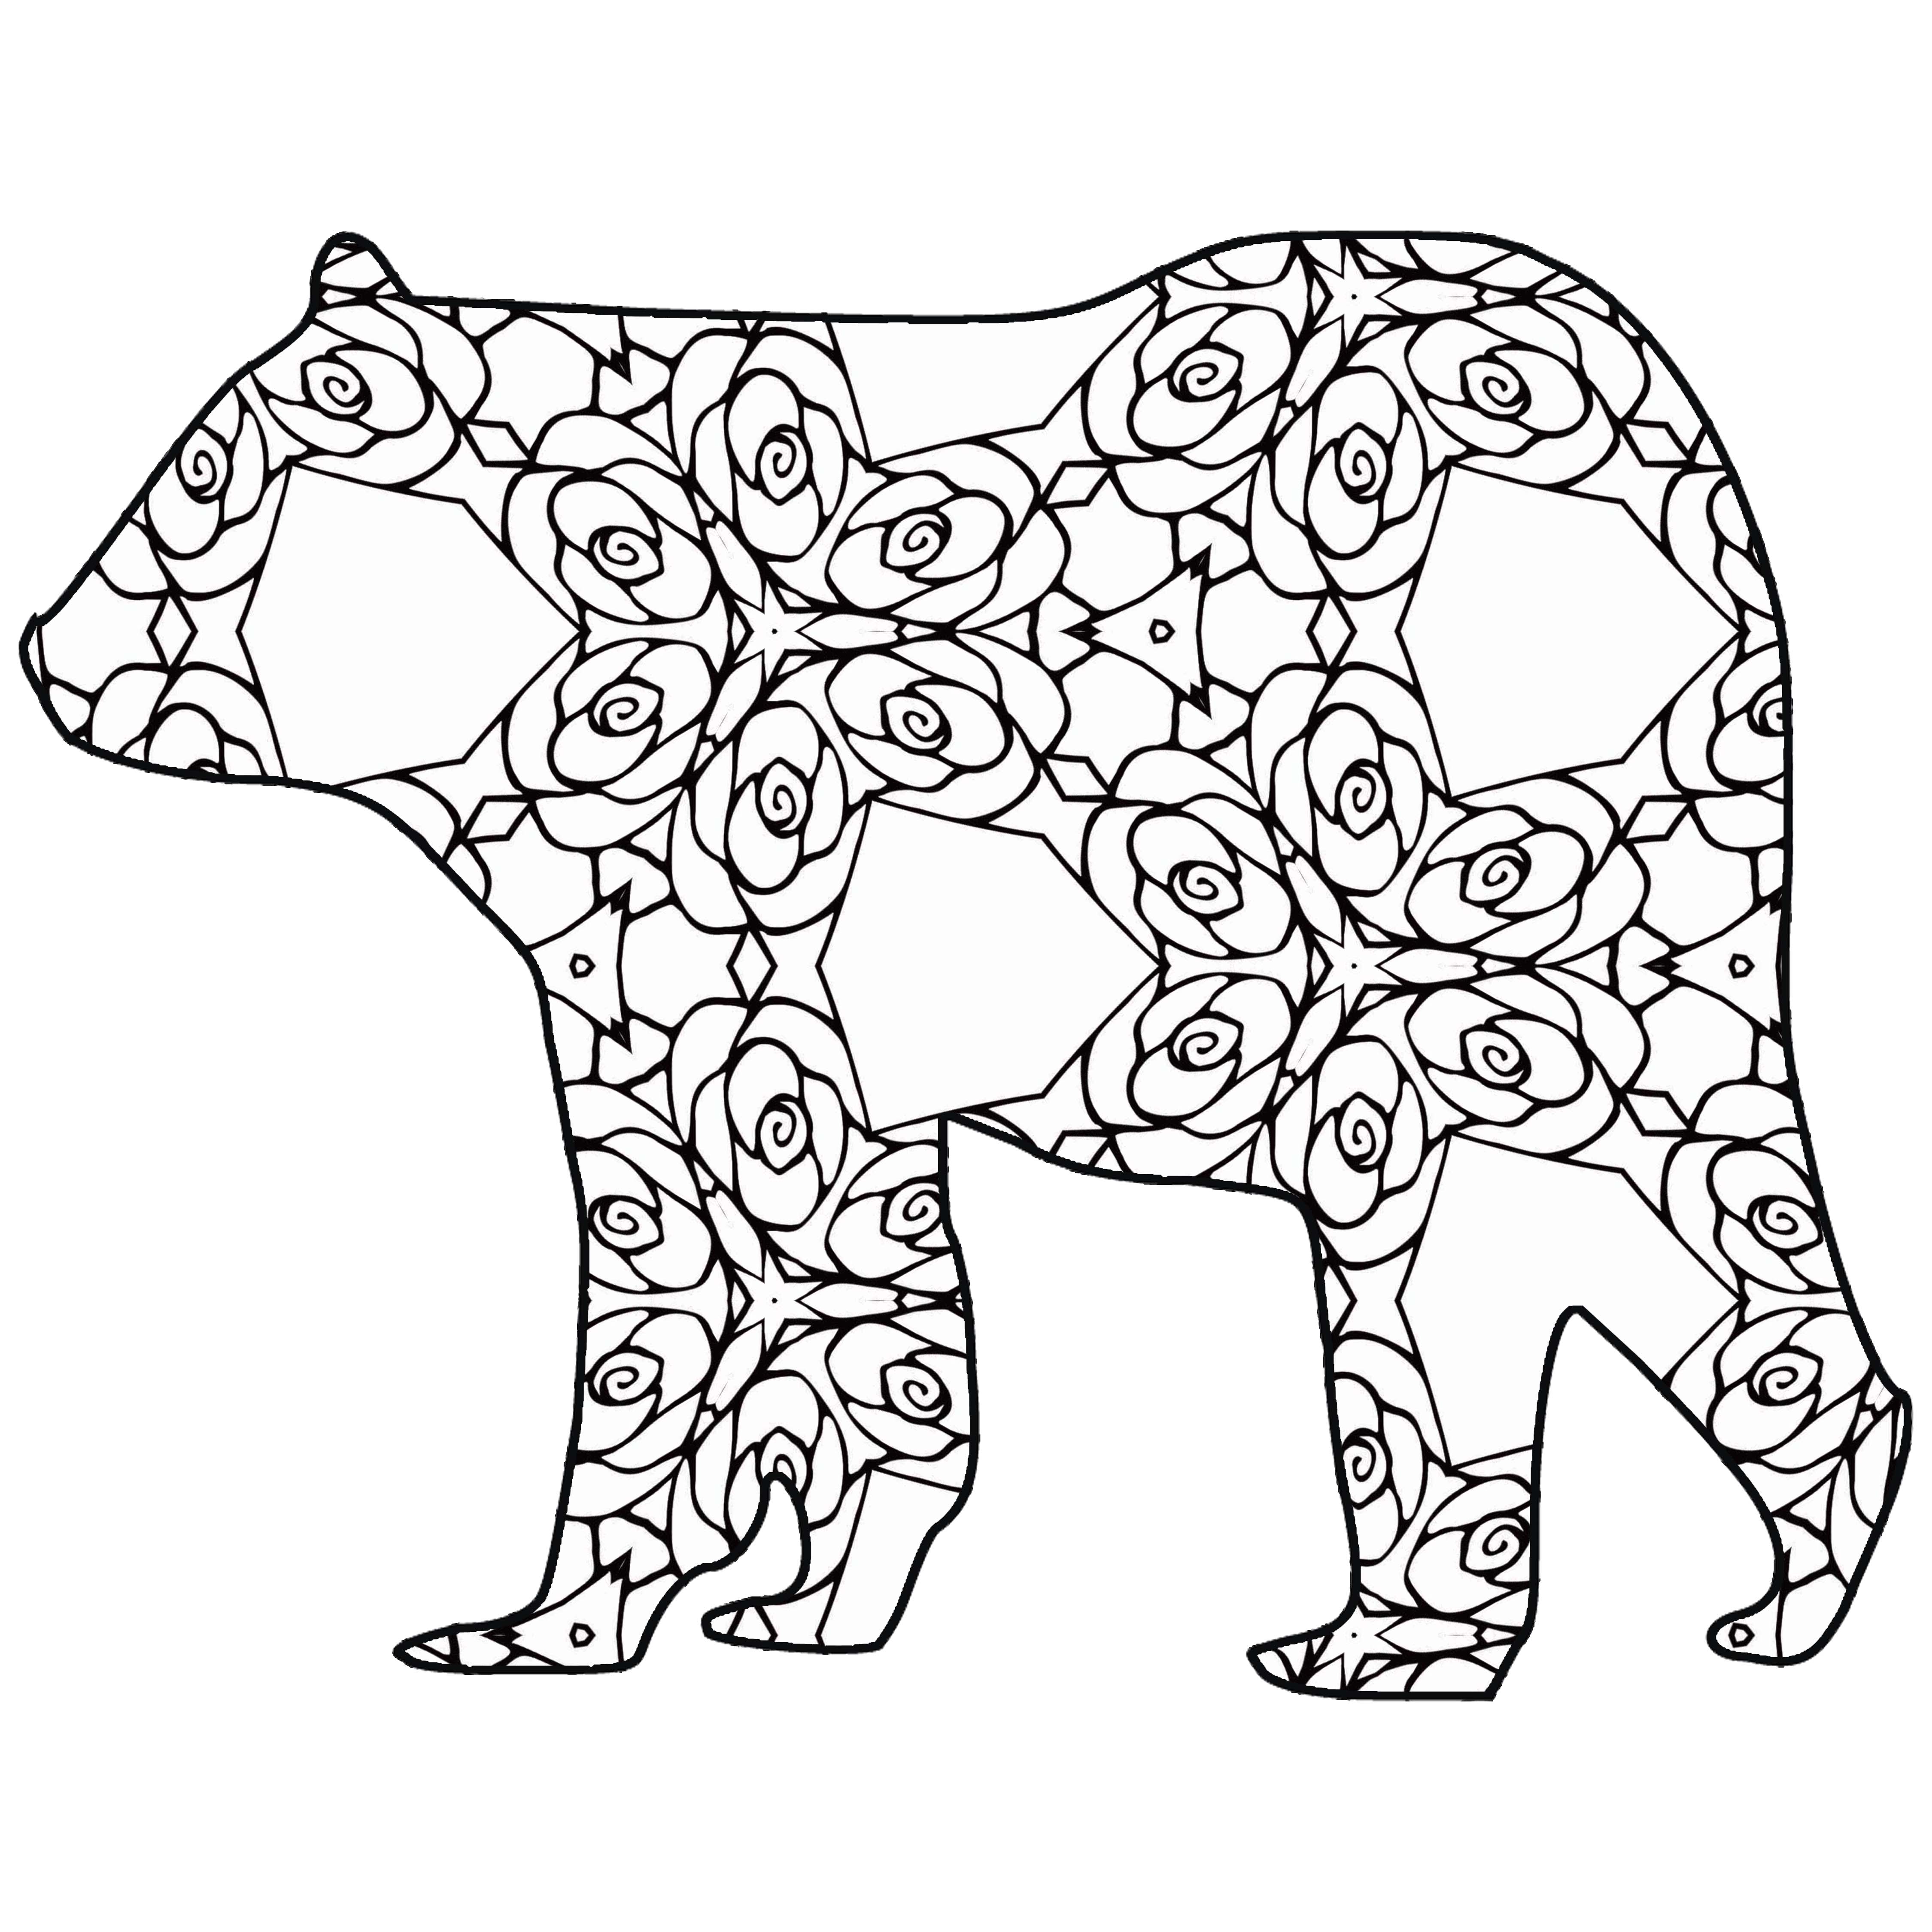 Coloring Pages Geometric Animals : Geometric Animal Coloring Pages Kids